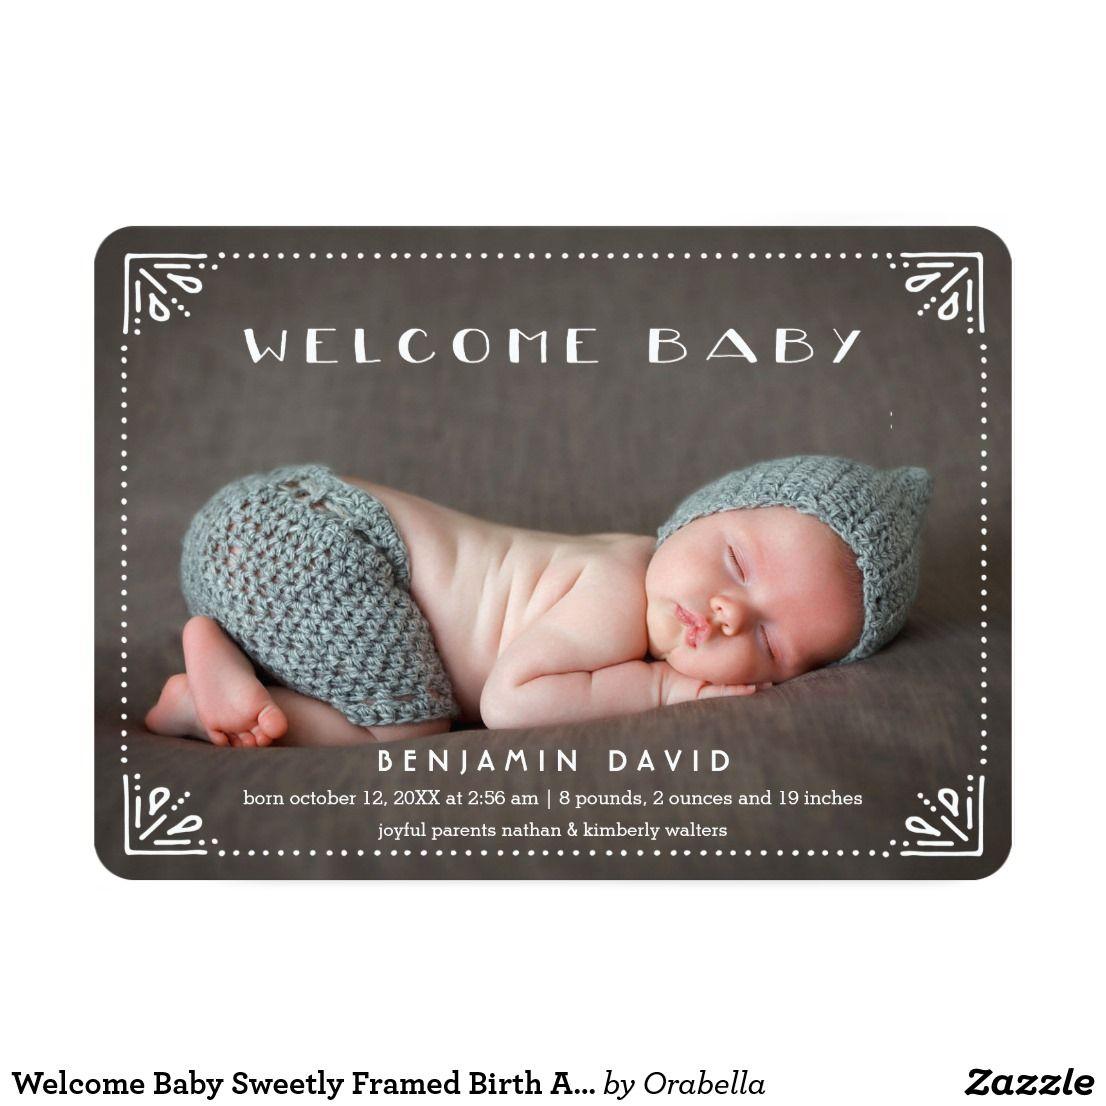 Welcome Baby Sweetly Framed Birth Announcement. Zazzle.com. Baby